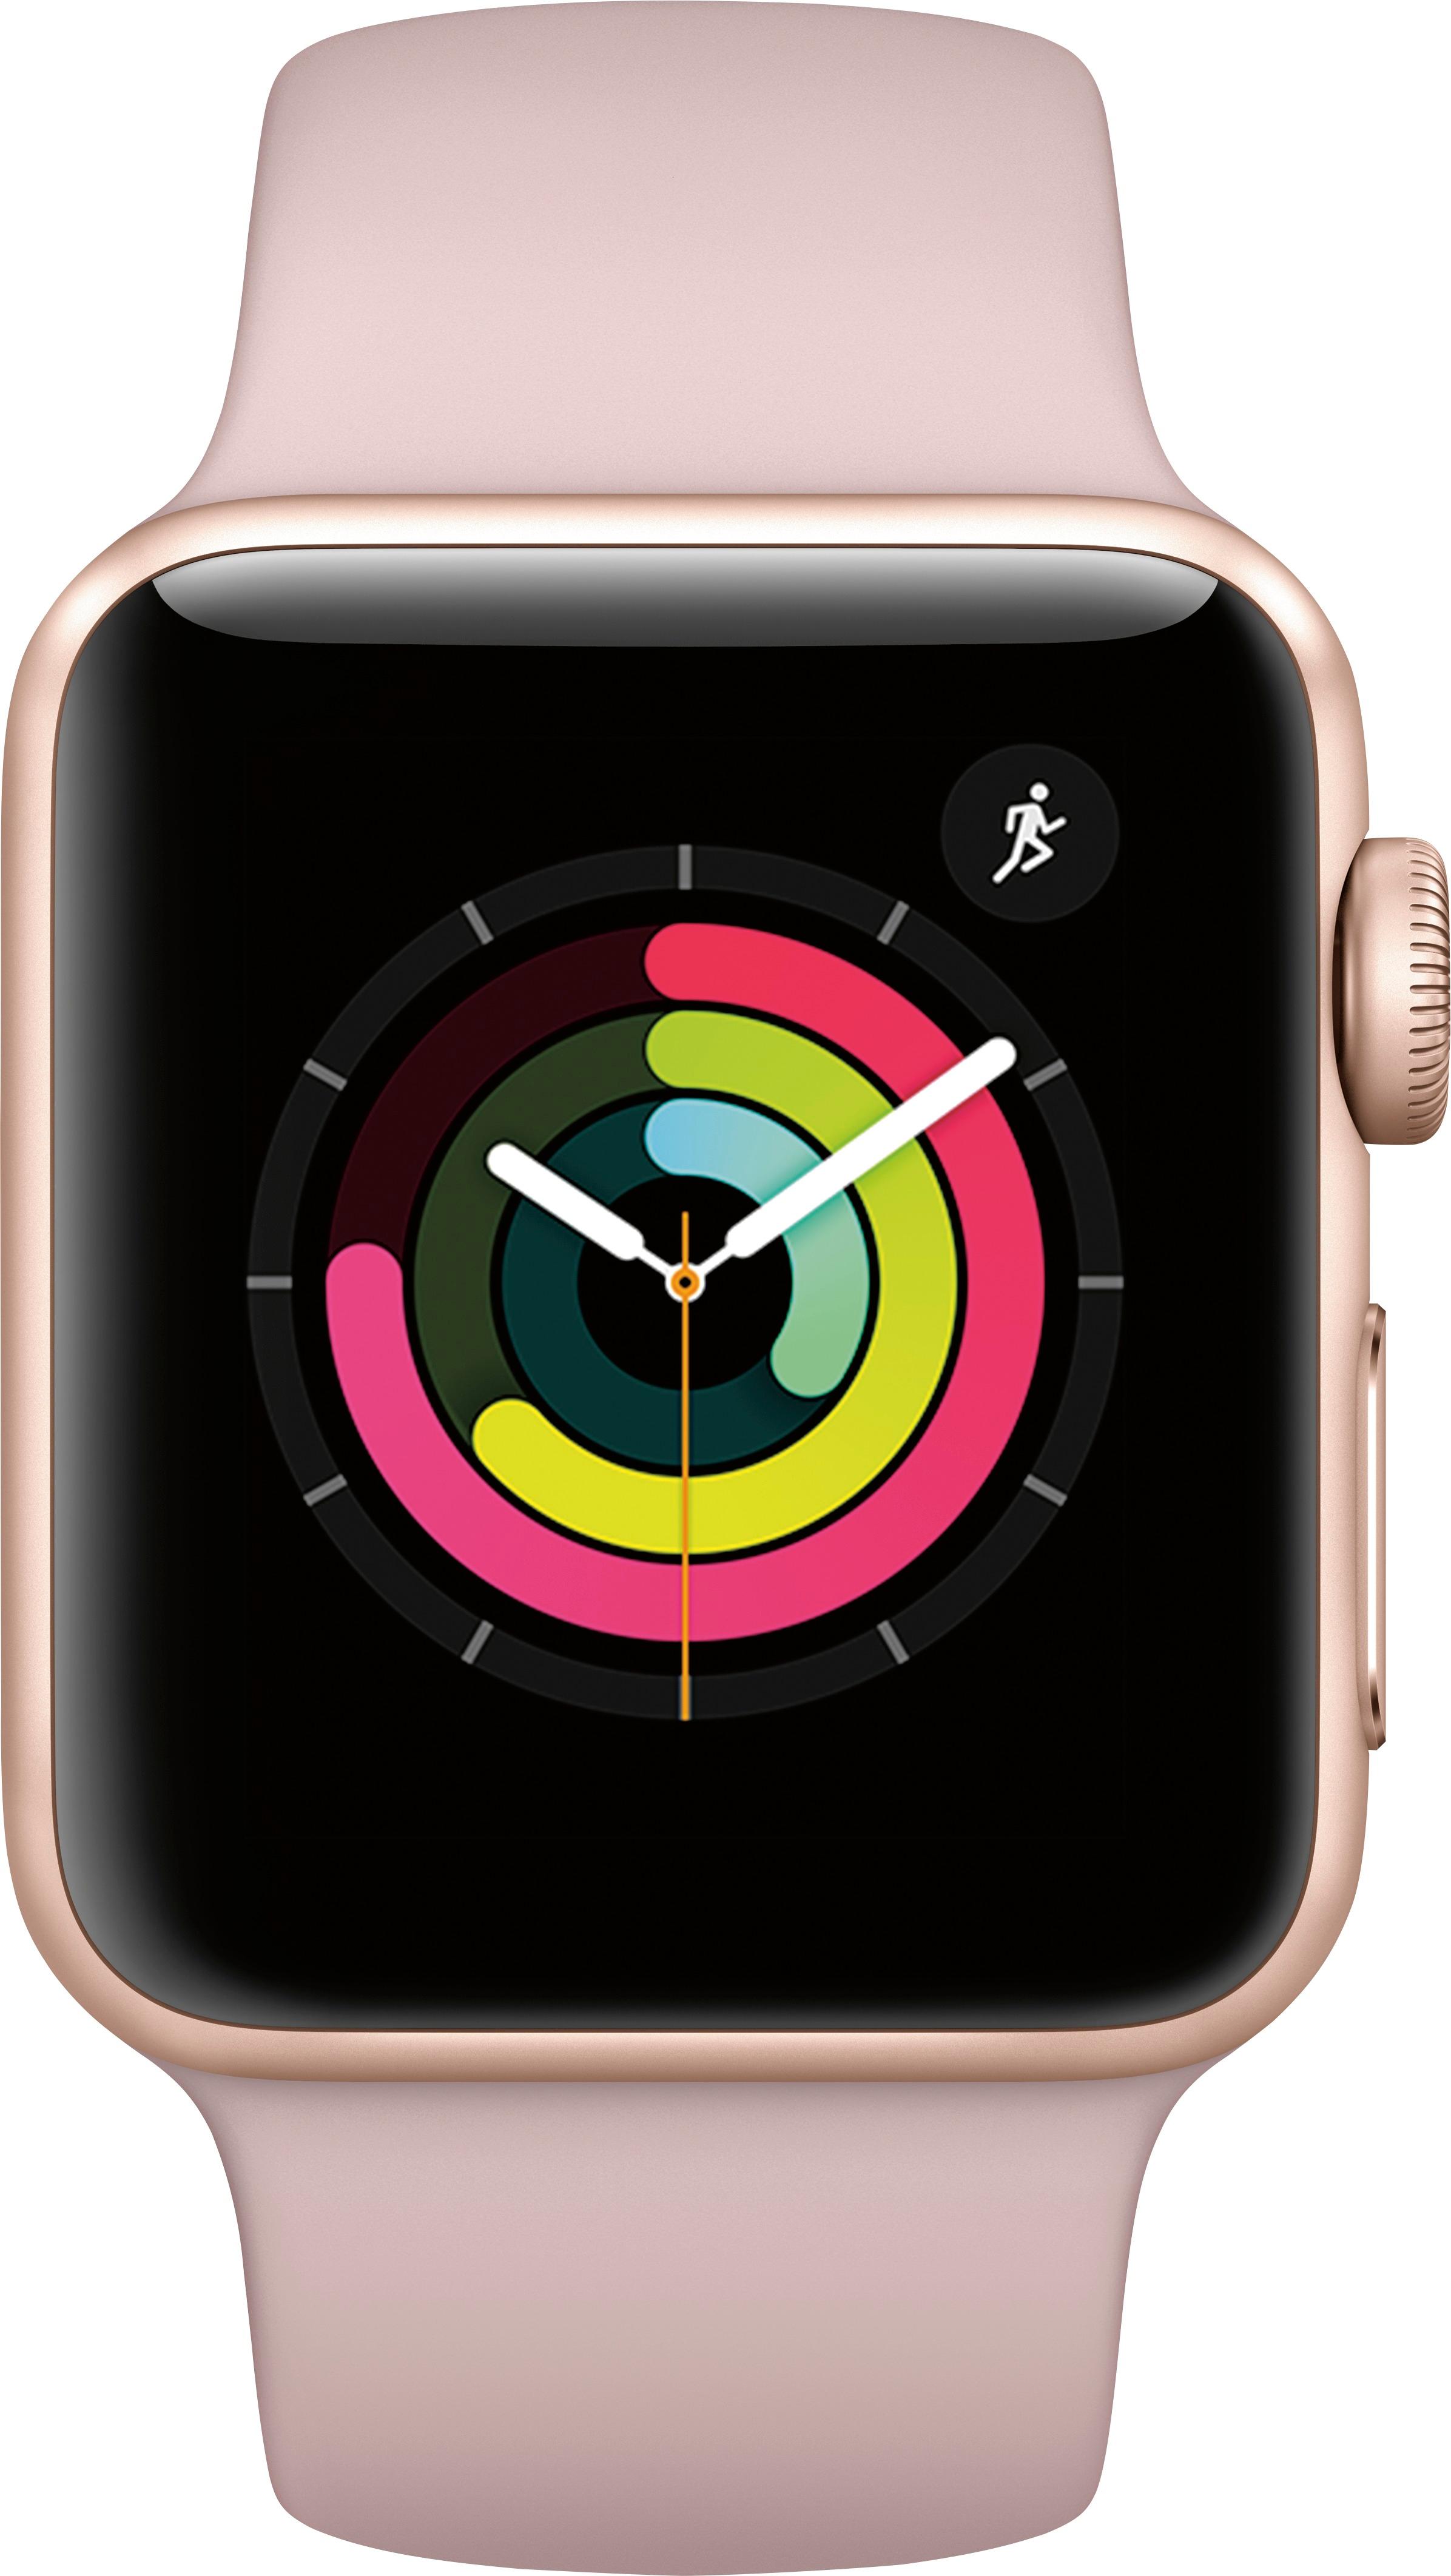 Best Buy: Geek Squad Certified Refurbished Apple Watch Series 3 (GPS) 38mm  Gold Aluminum Case with Pink Sand Sport Band Gold Aluminum GSRF-MQKW2LL/A